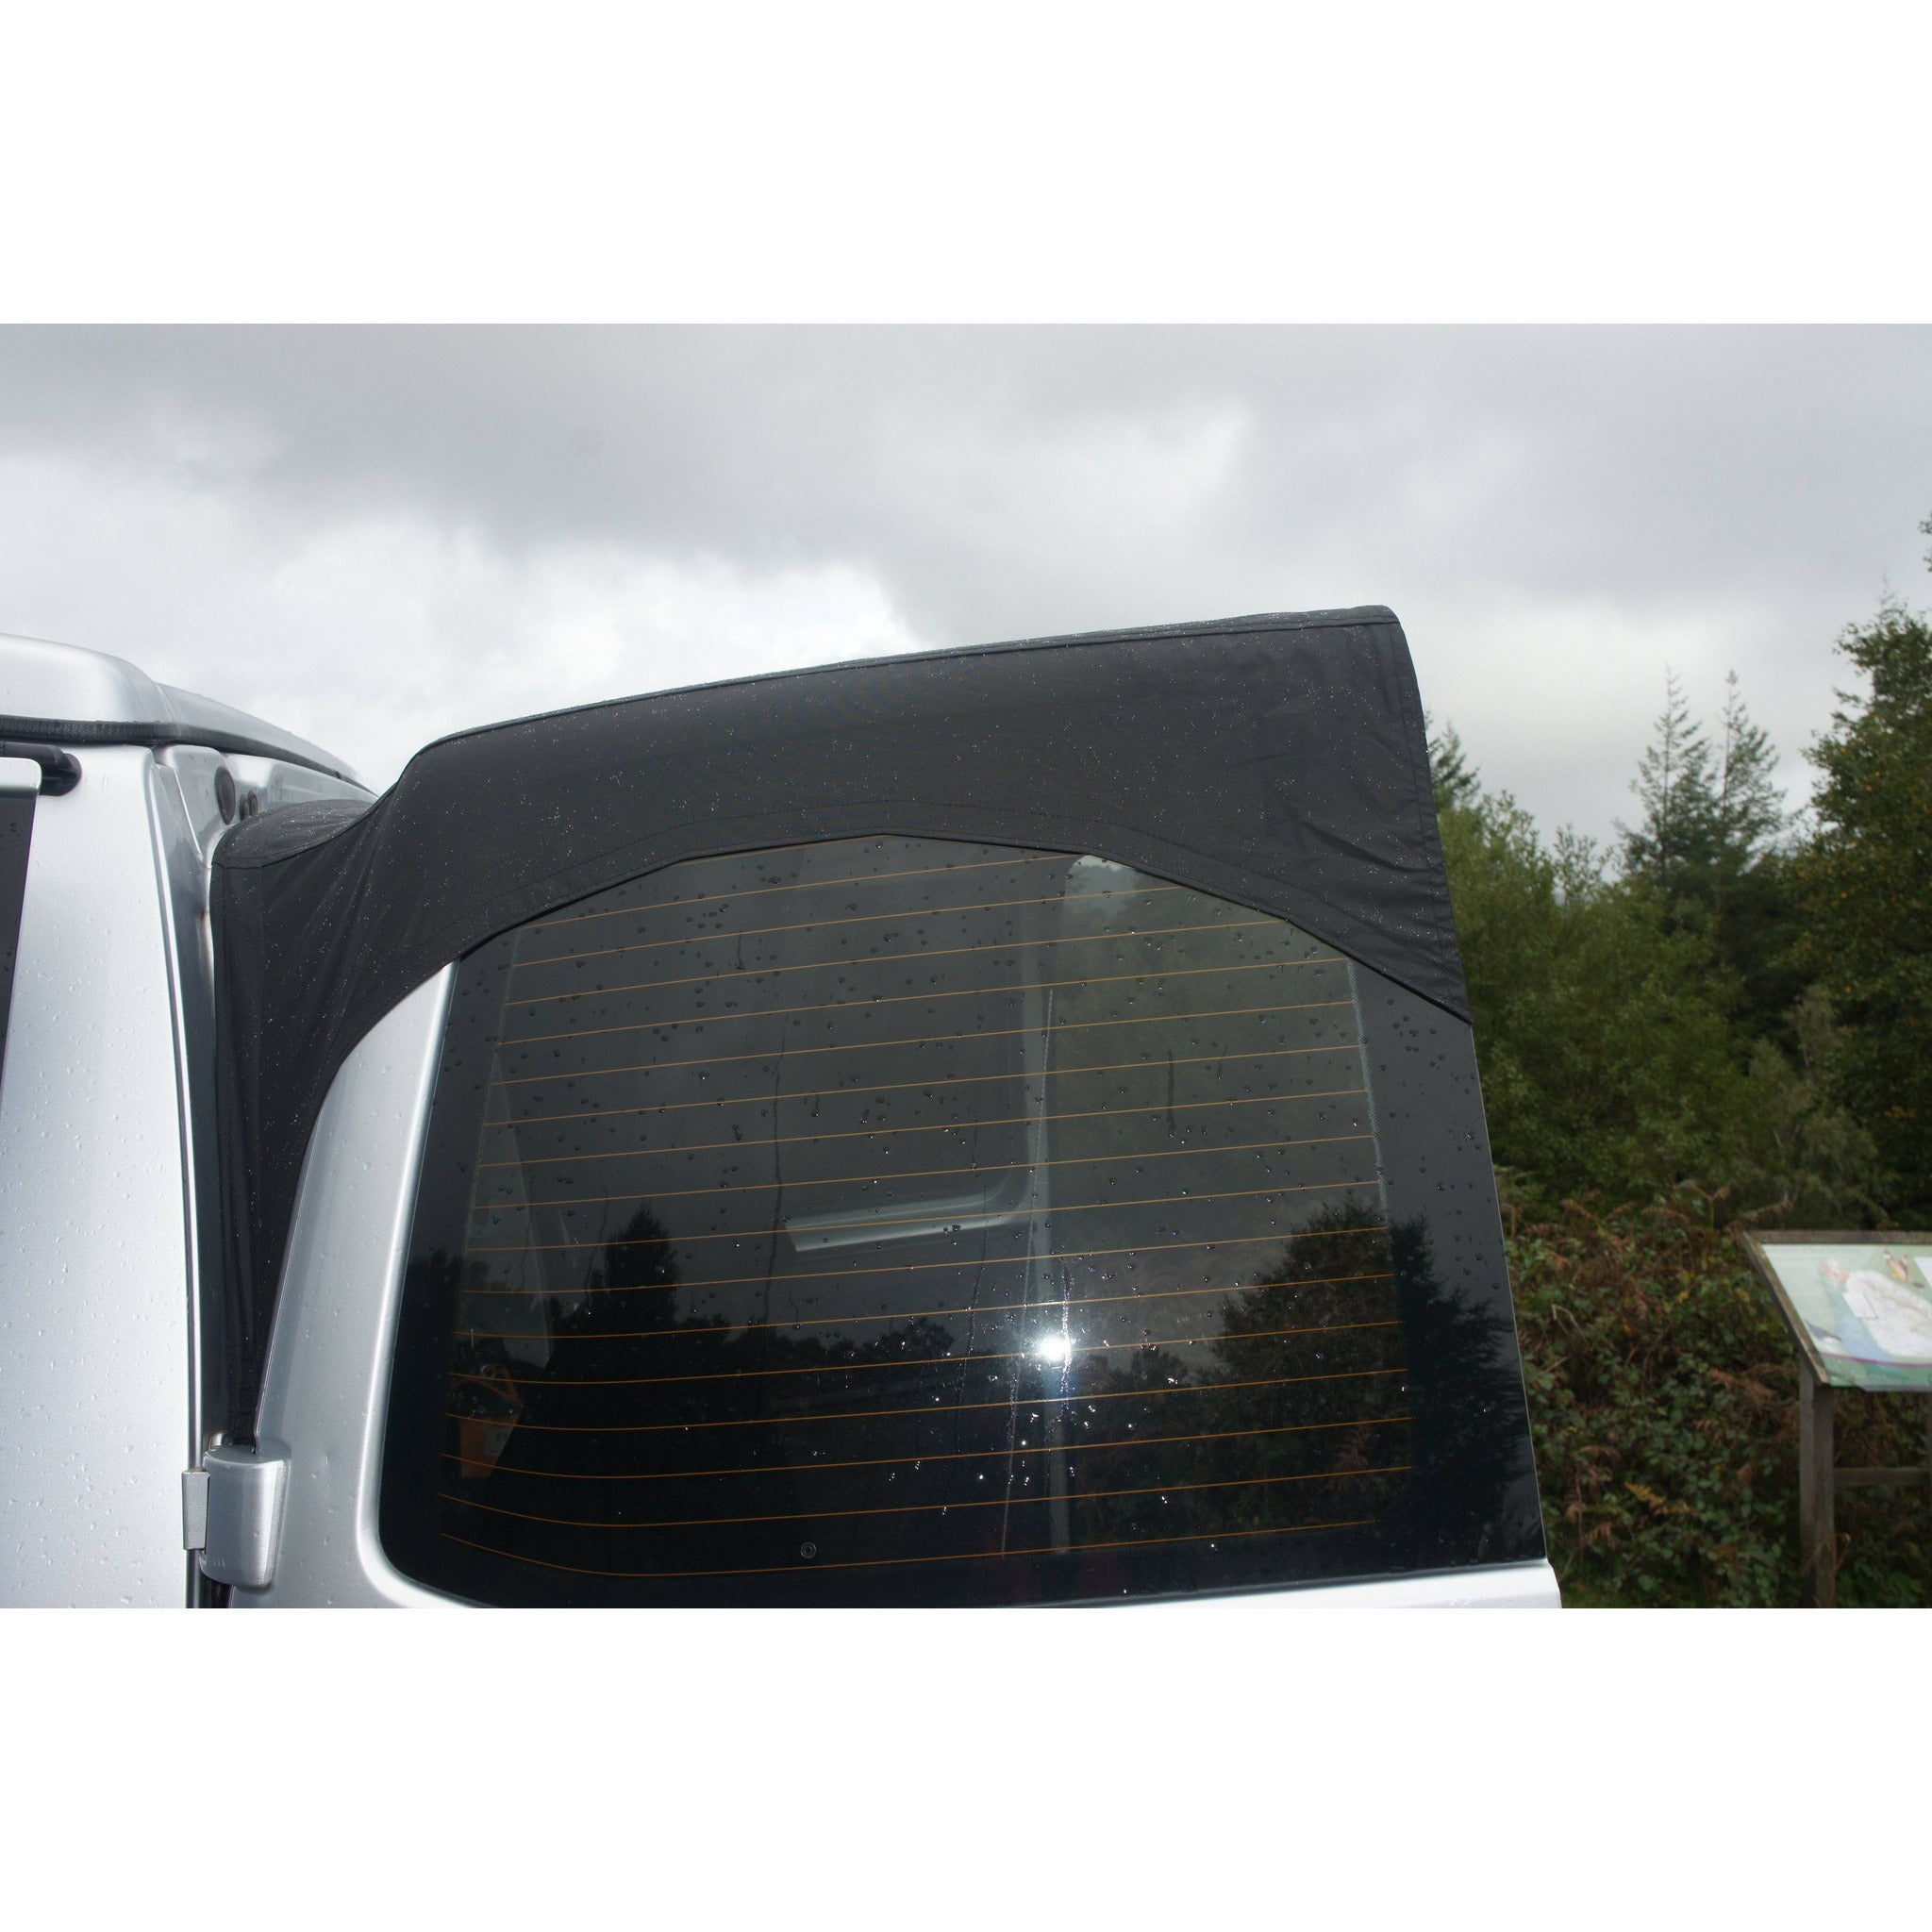 No Tailgate? No problem Barn Door Campervan Awning for VW T4